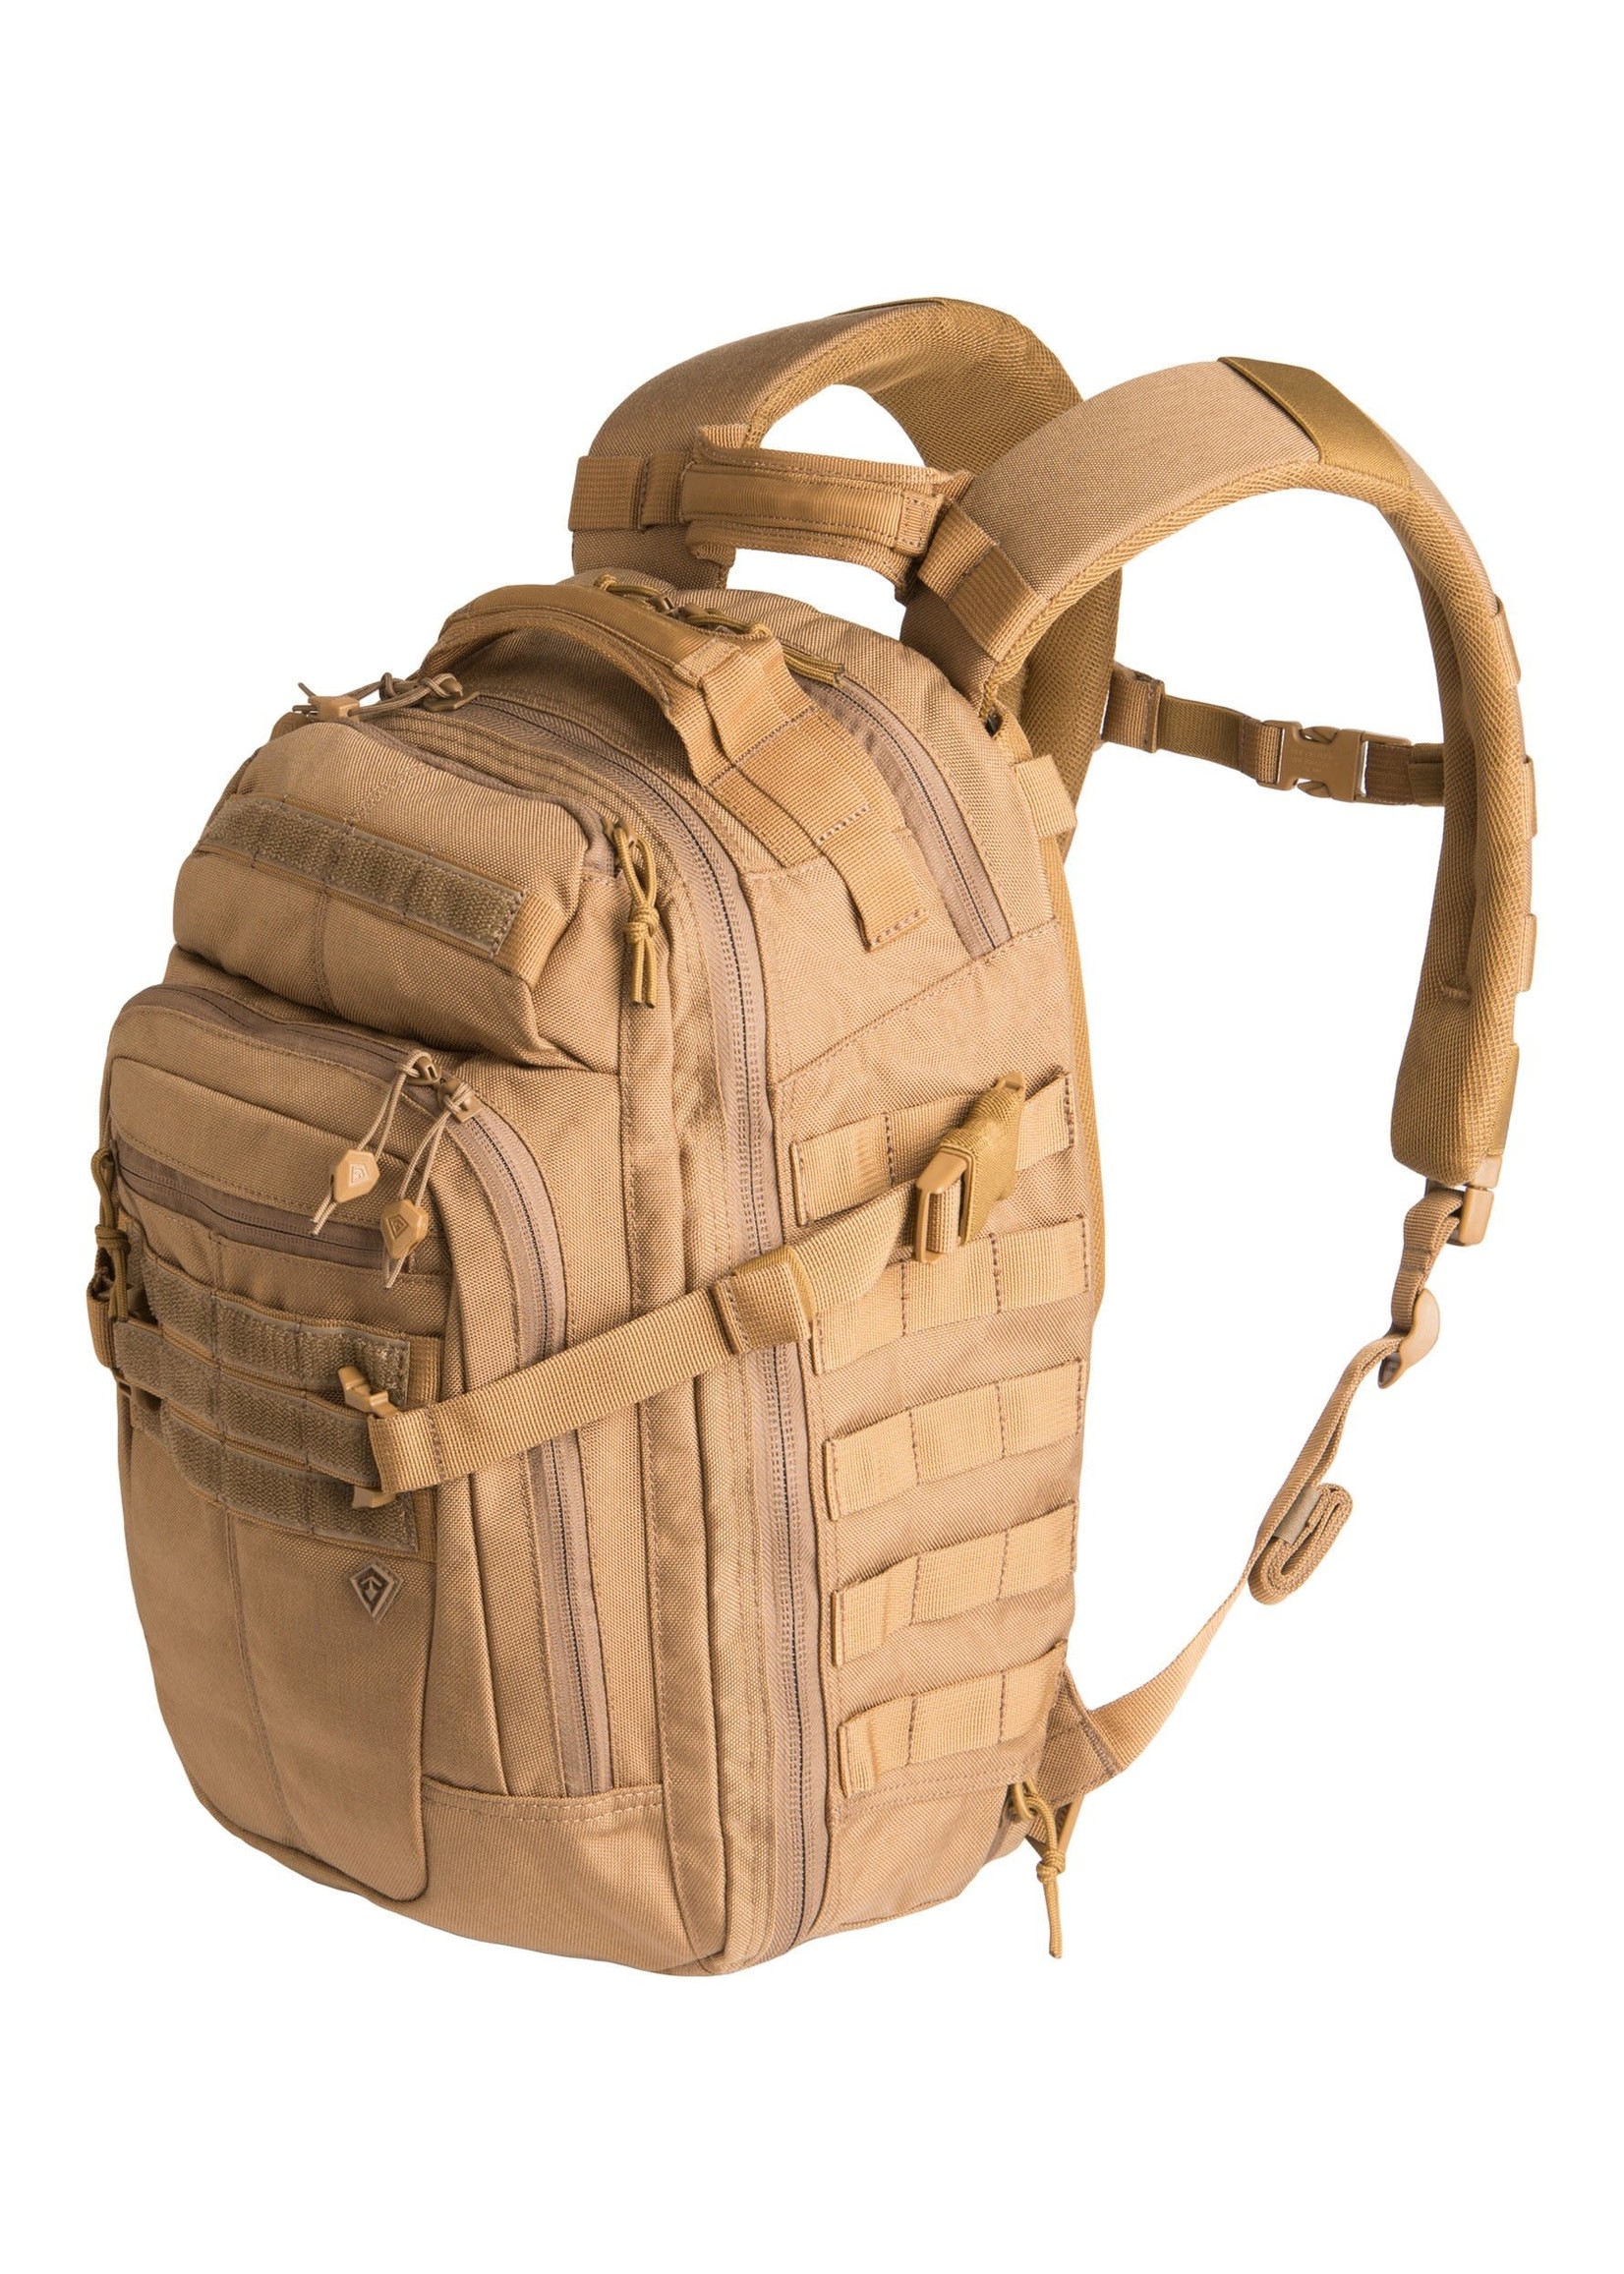 First Tactical First Tactical Specialist Half-Day Backpack 25L